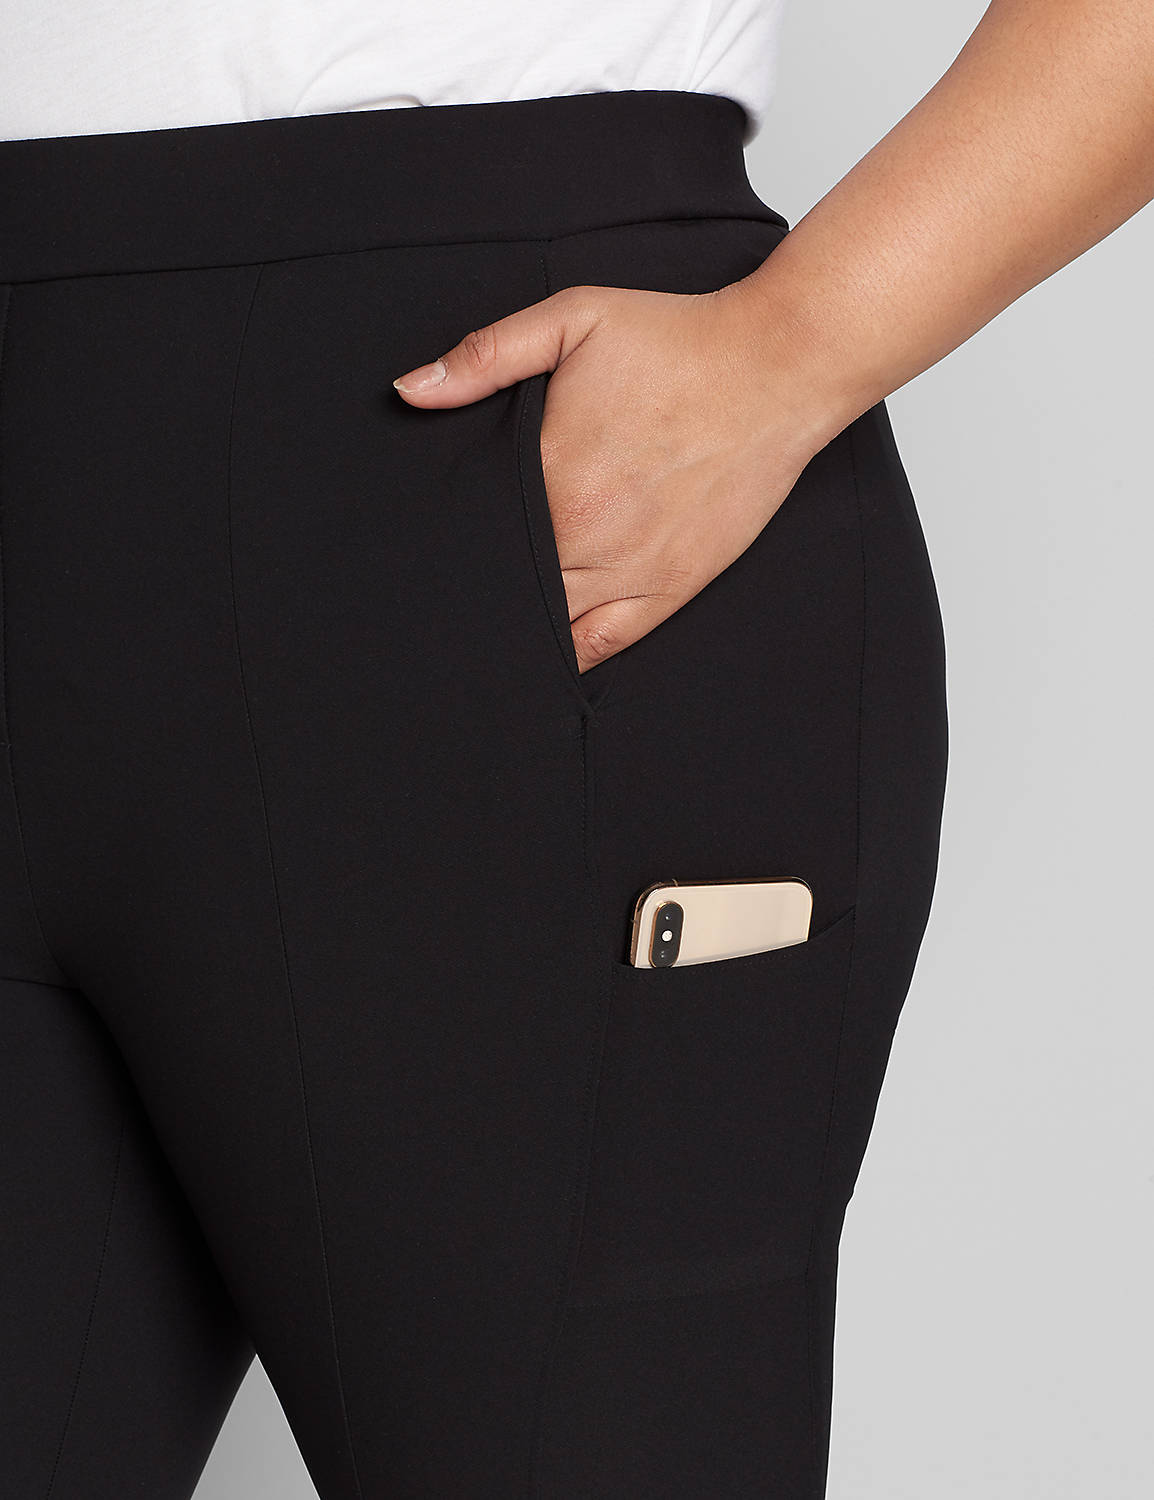 On-The-Go Cell Phone Pocket Legging 1117651:Pitch Black LB 1000322:18 Product Image 4